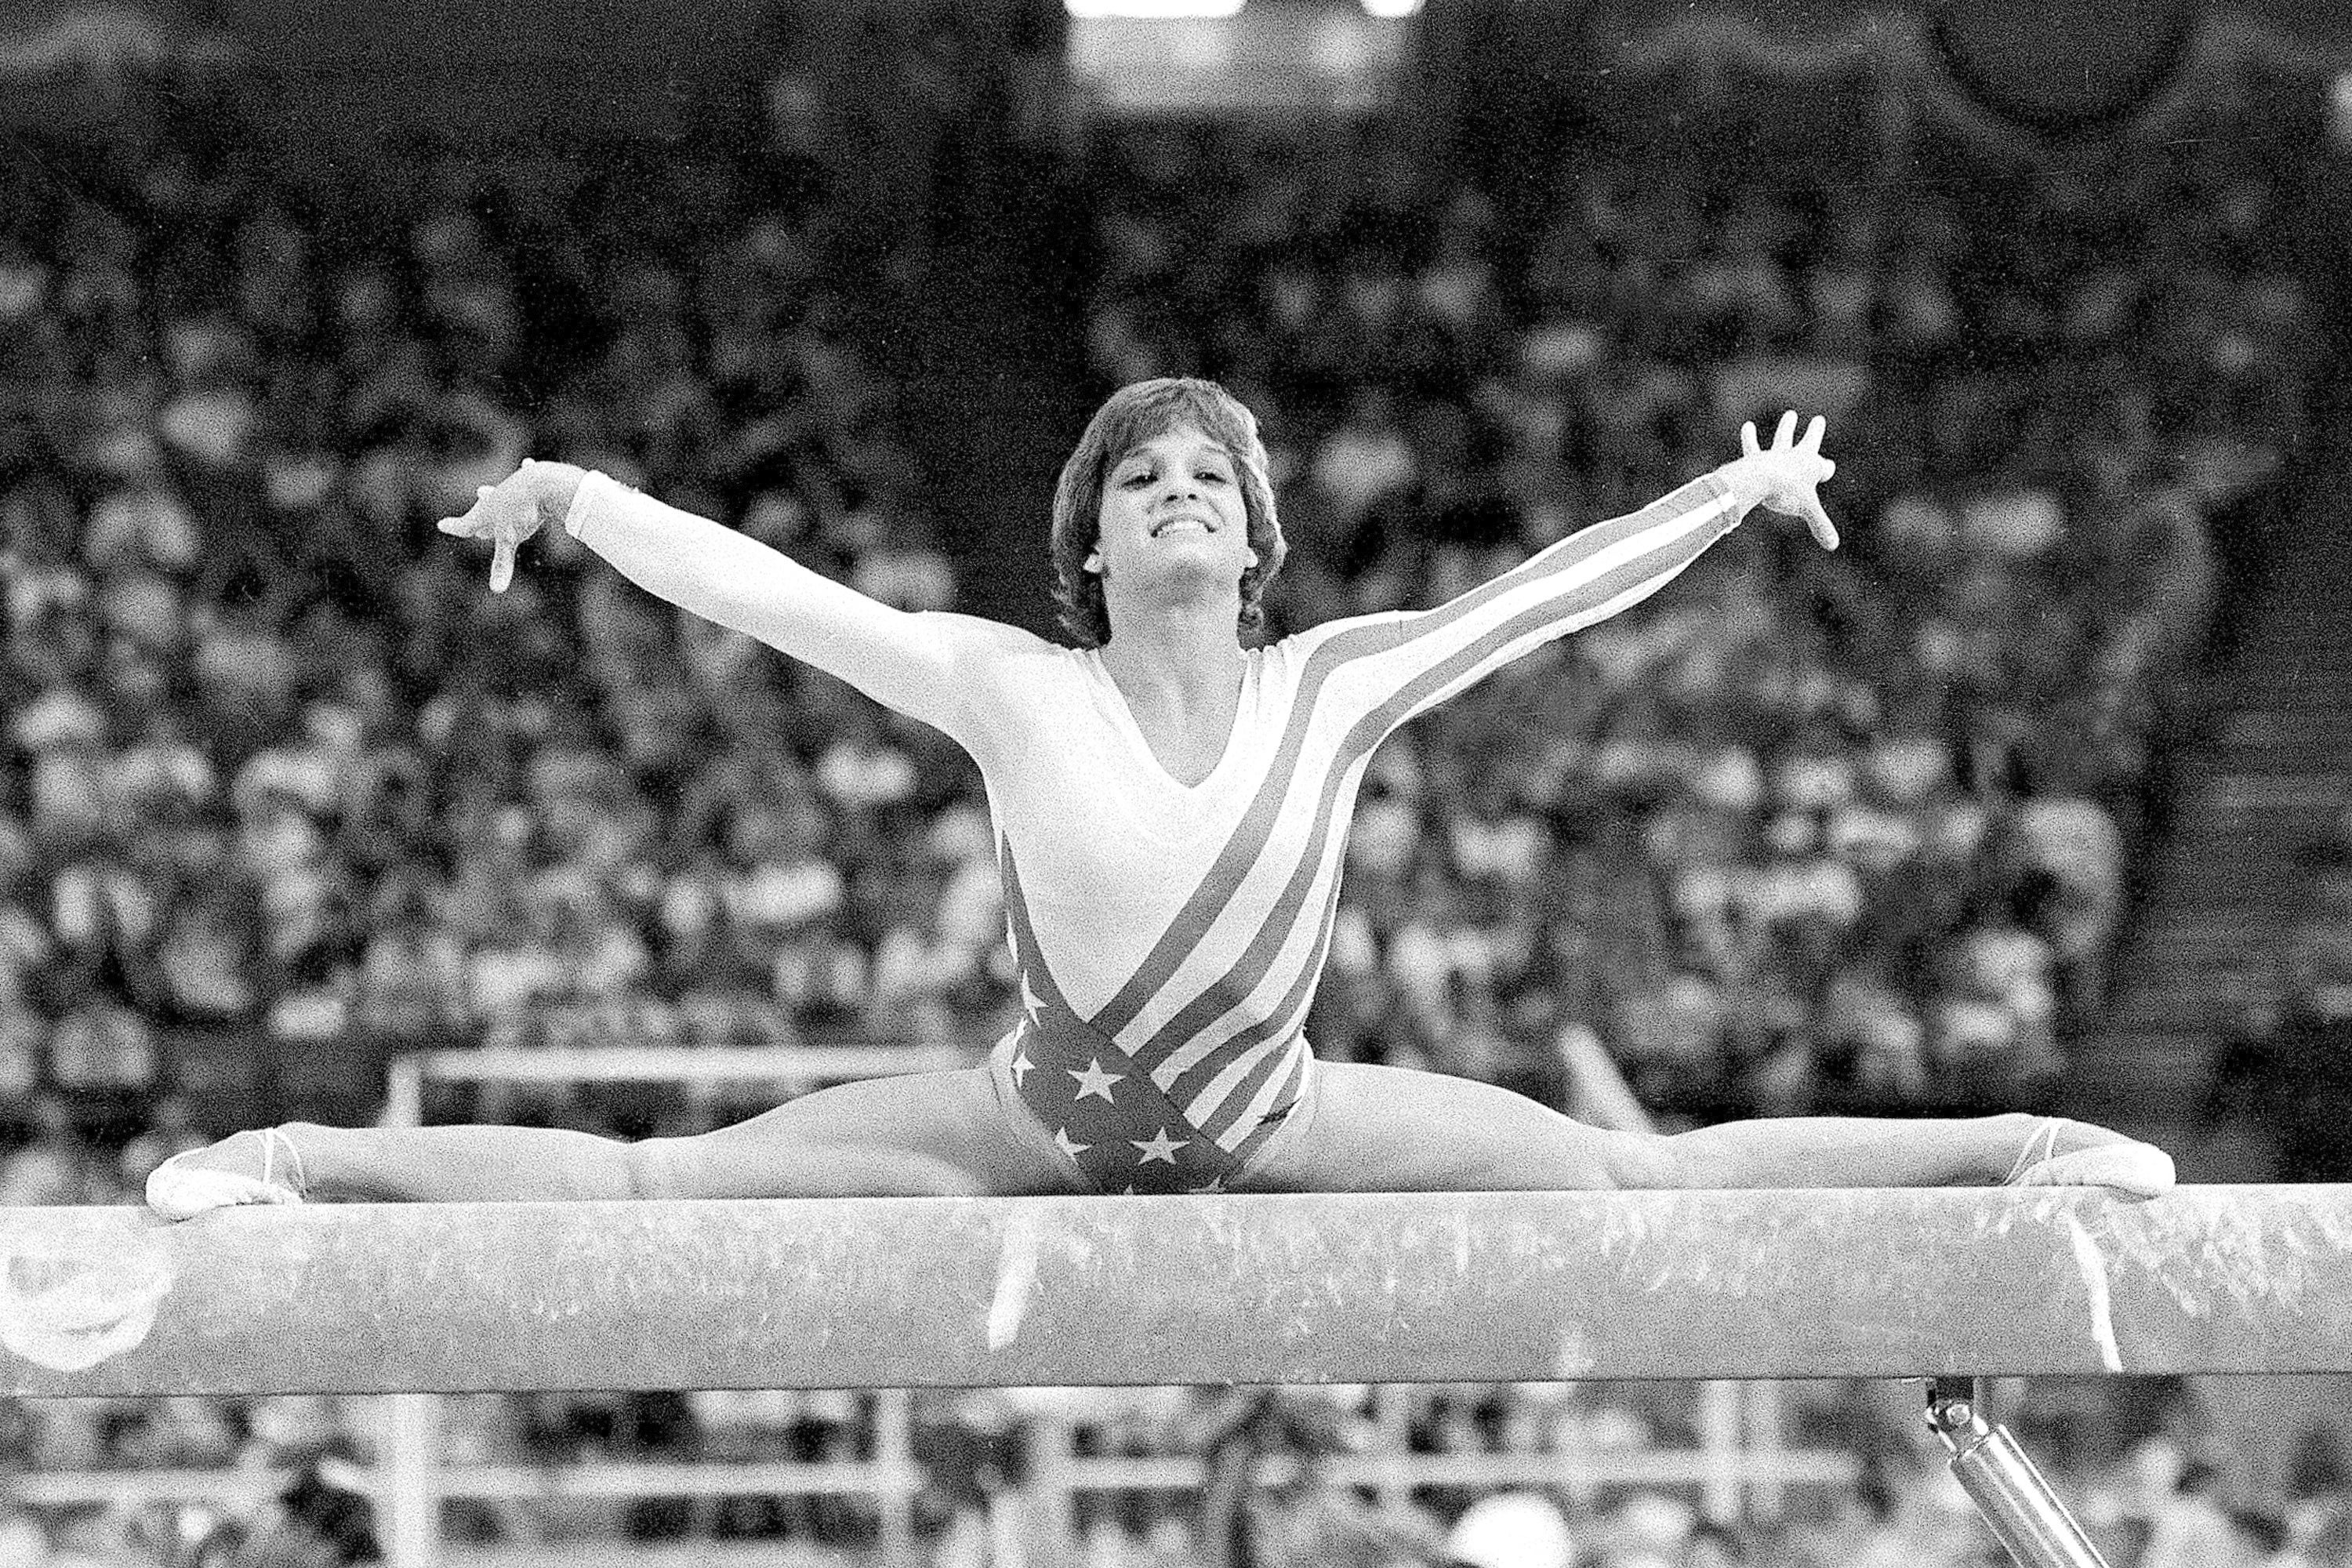 Mary Lou Retton won a gold, two silver and two bronze medals in gymnastics in the 1984 Olympic Games